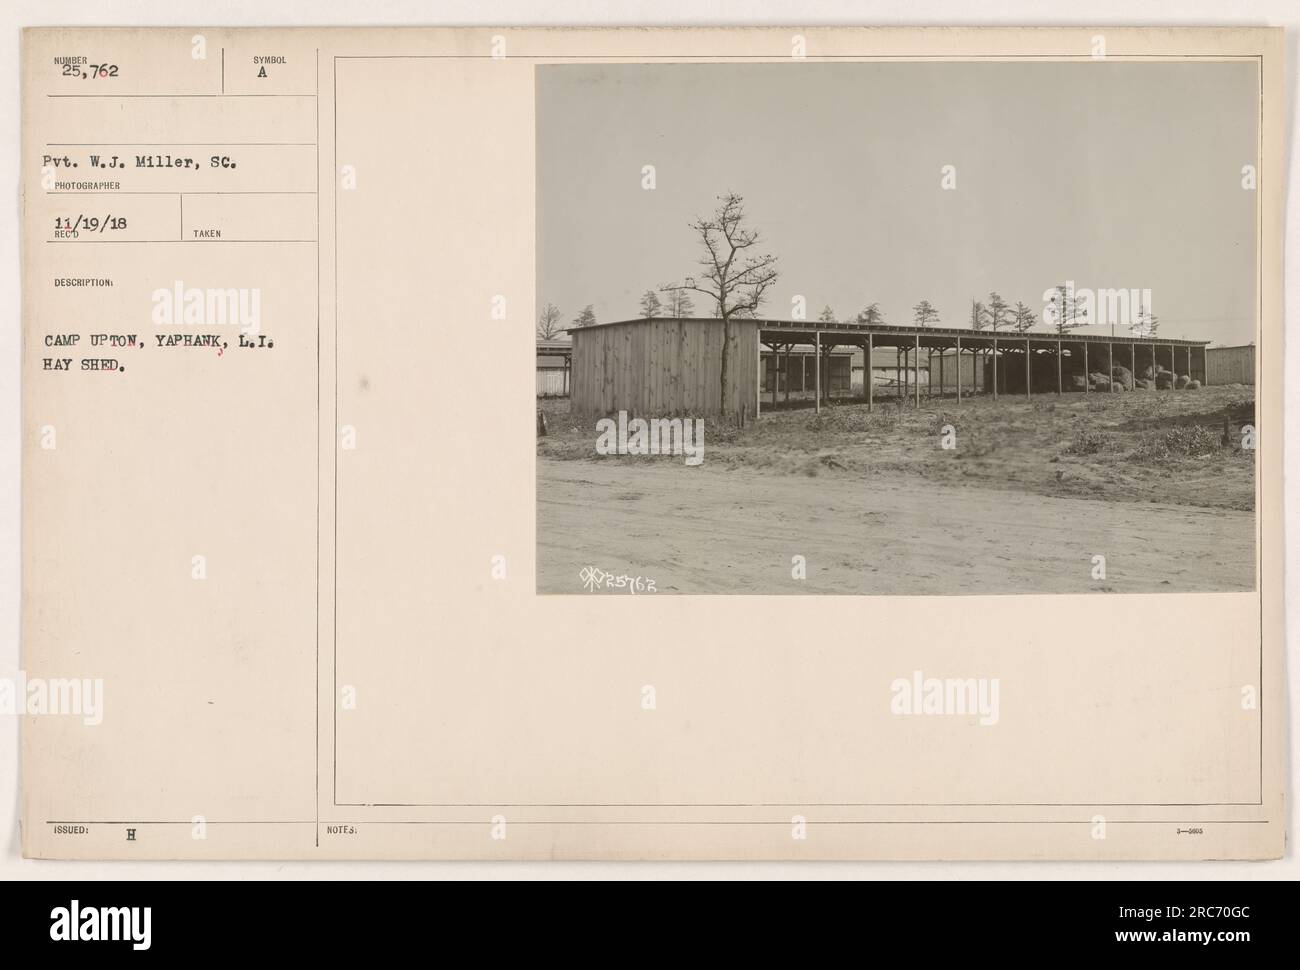 Private W.J. Miller, a photographer, took this photograph on November 19, 1918, at a camp in Yaphank, Long Island. The image shows a hay shed with the symbol 'H' on it. This is a documentation of American military activities during World War One. Stock Photo